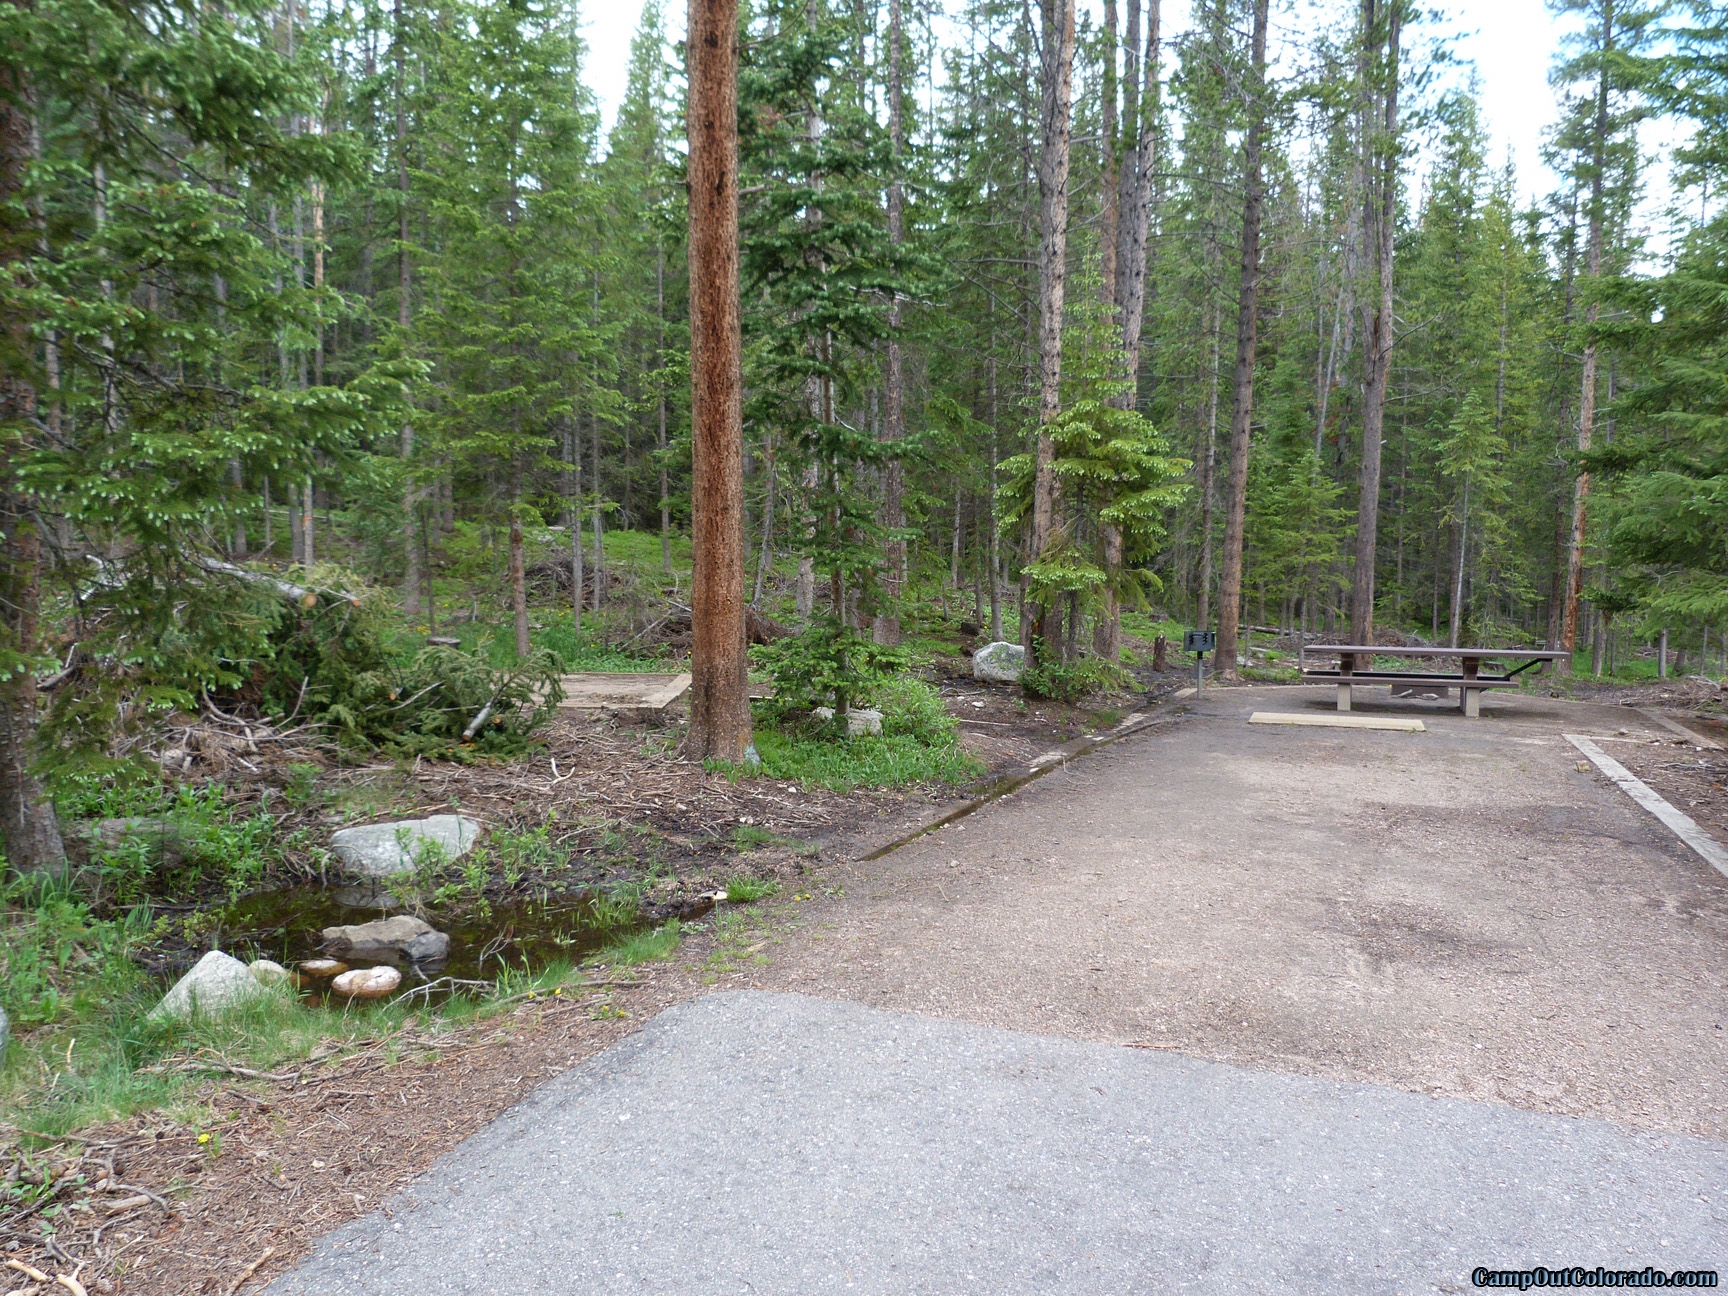 camp-out-colorado-chambers-lake-campground-dense-trees